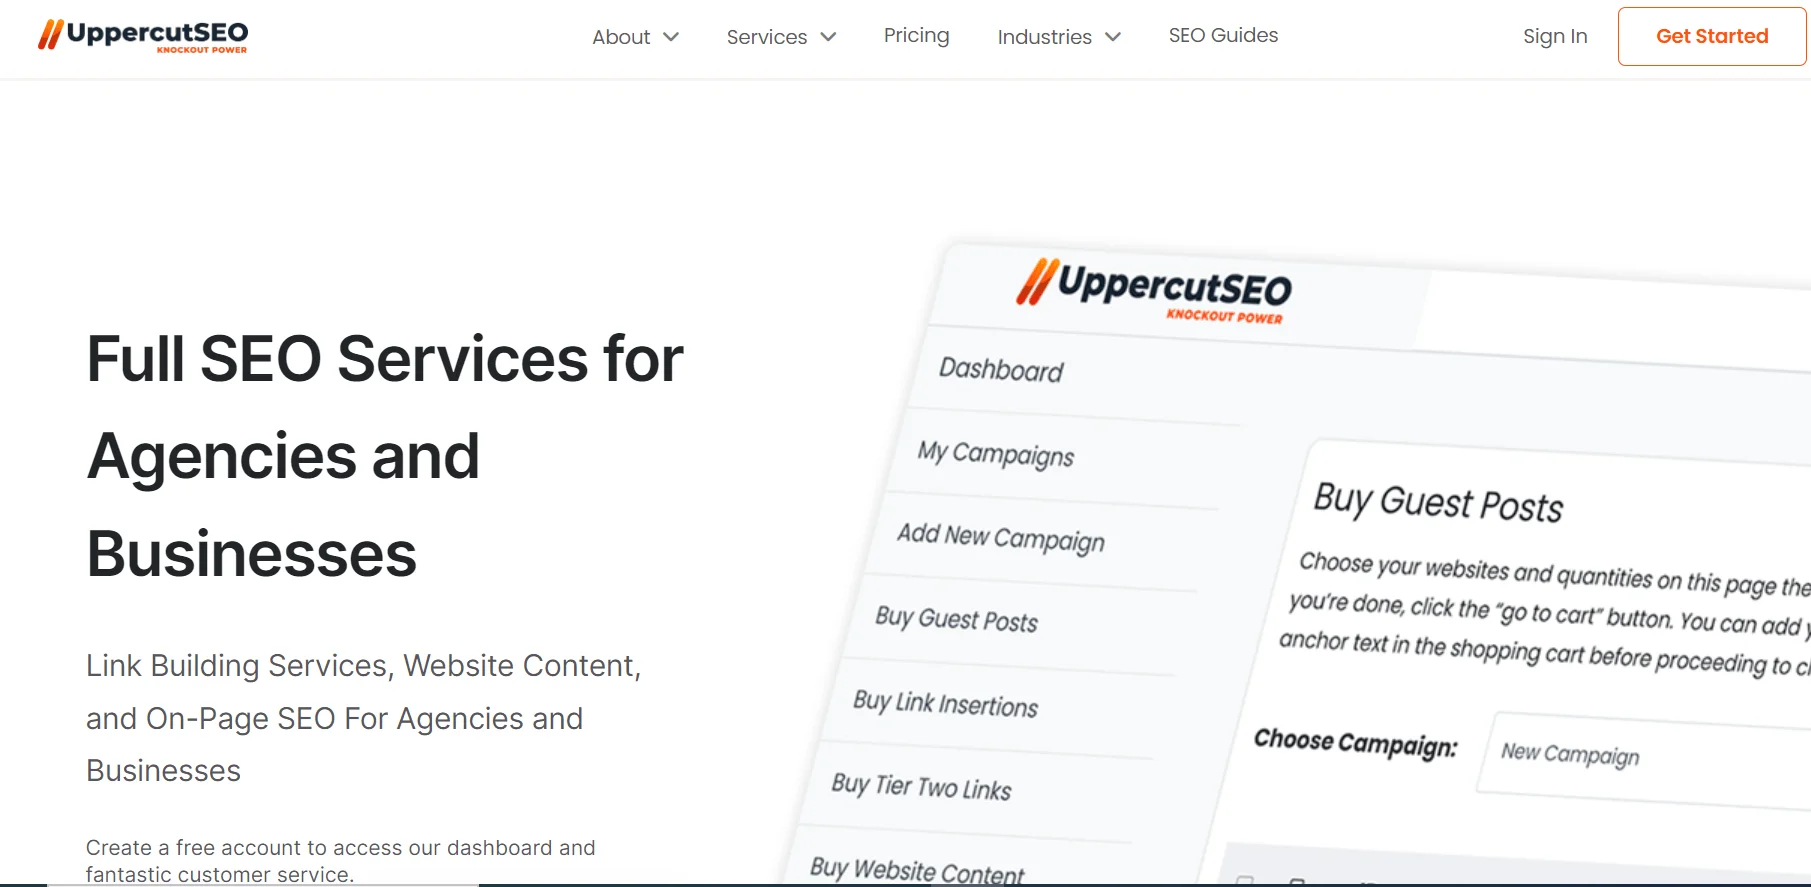 UppercutSEO is a compelling link building services agency where you can filter sites based on niche, domain rating, domain authority, and traffic metrics